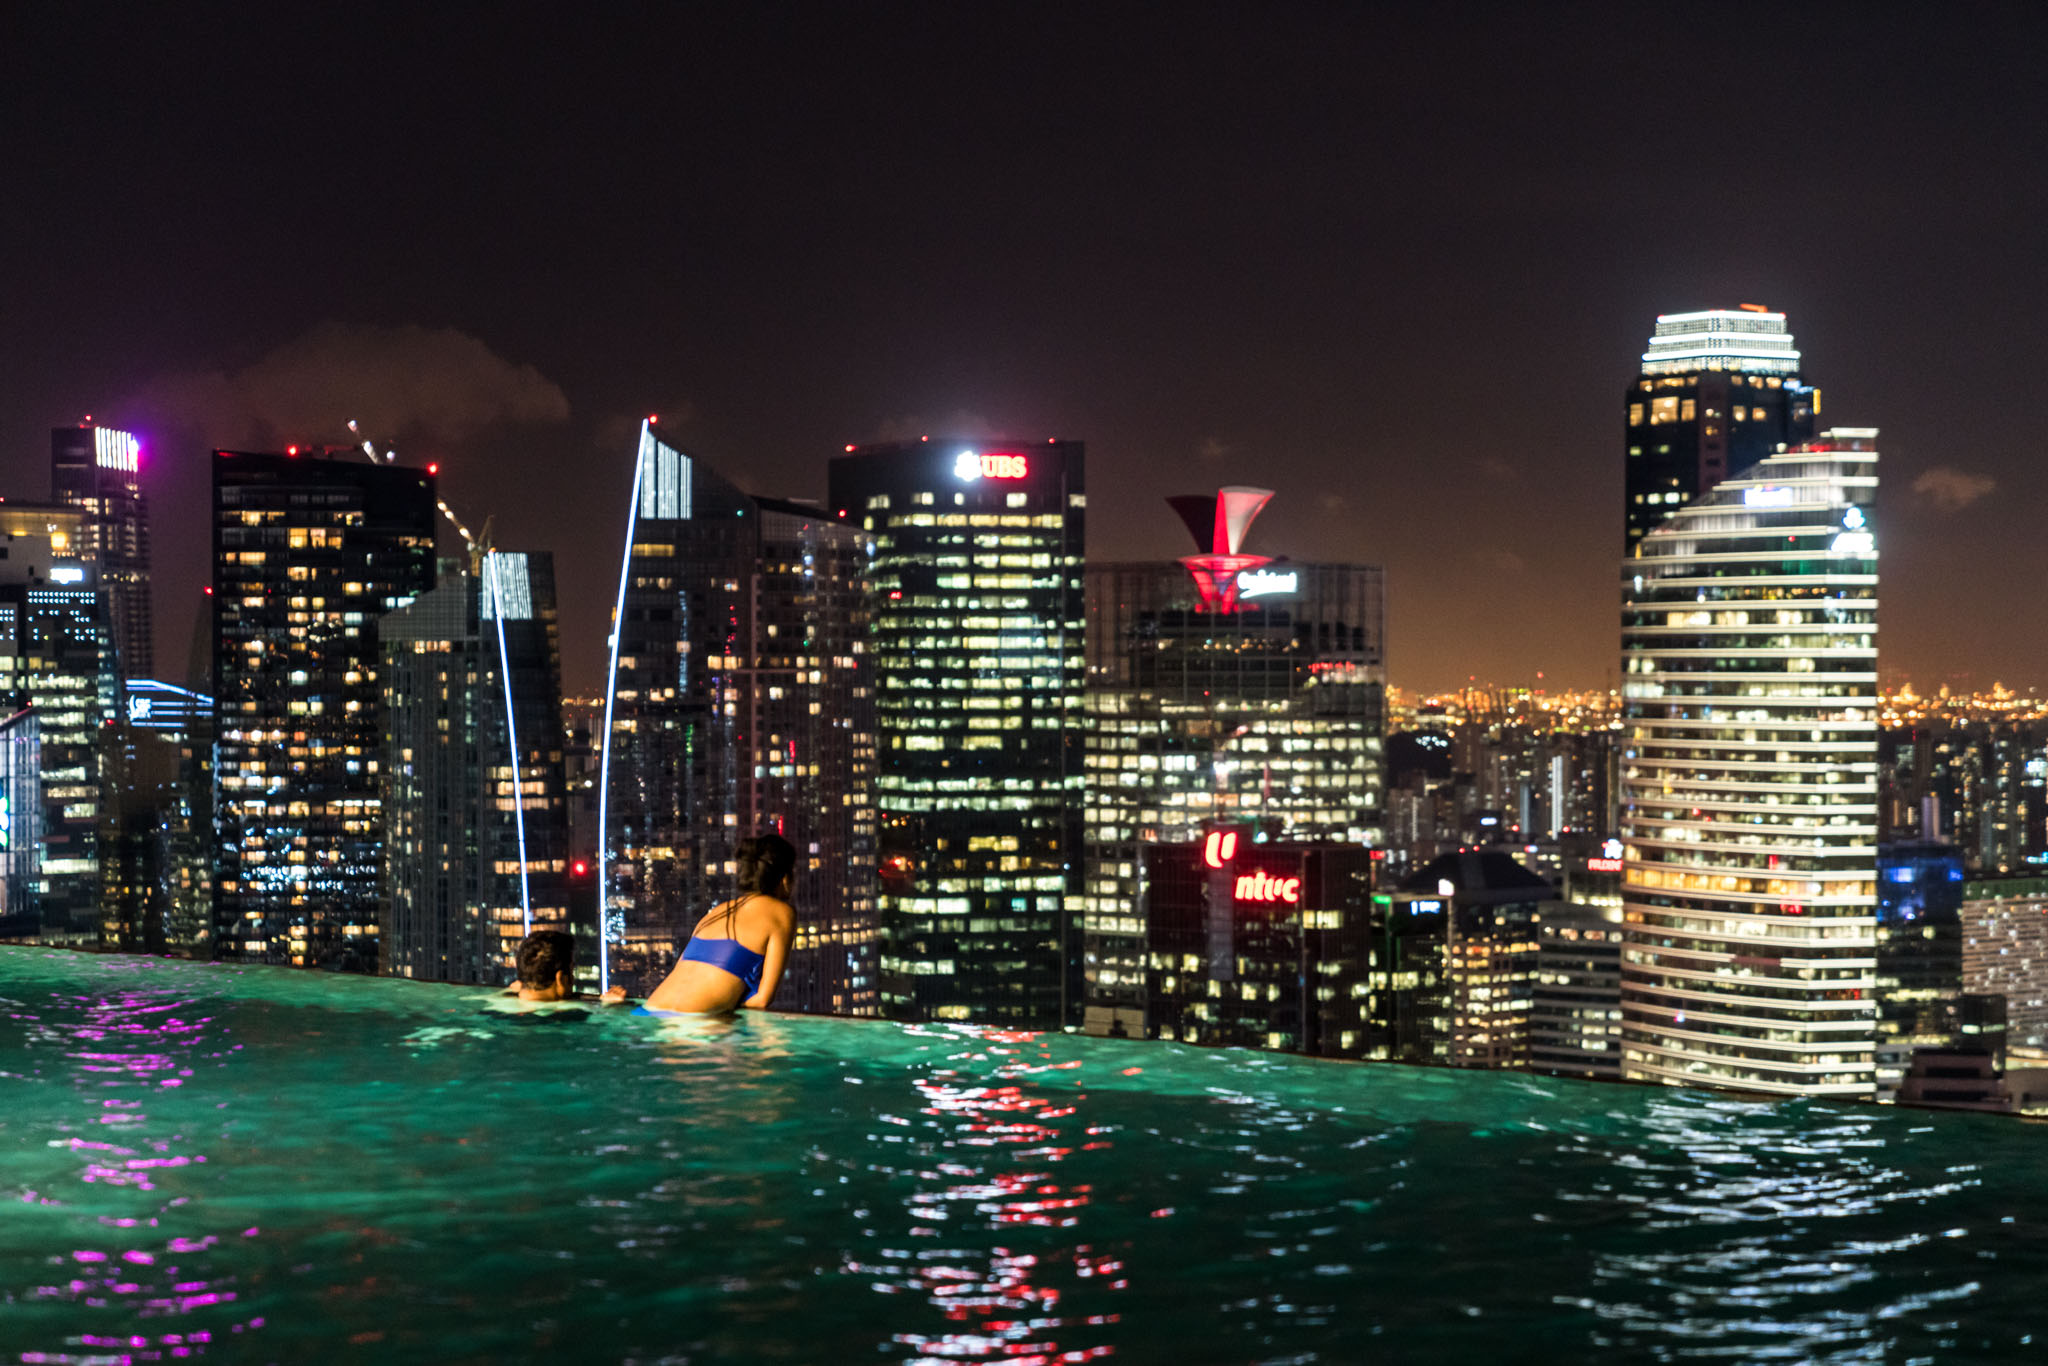 I Toured Singapore's Marina Bay Sands Resort With Rooftop Pool; Tour